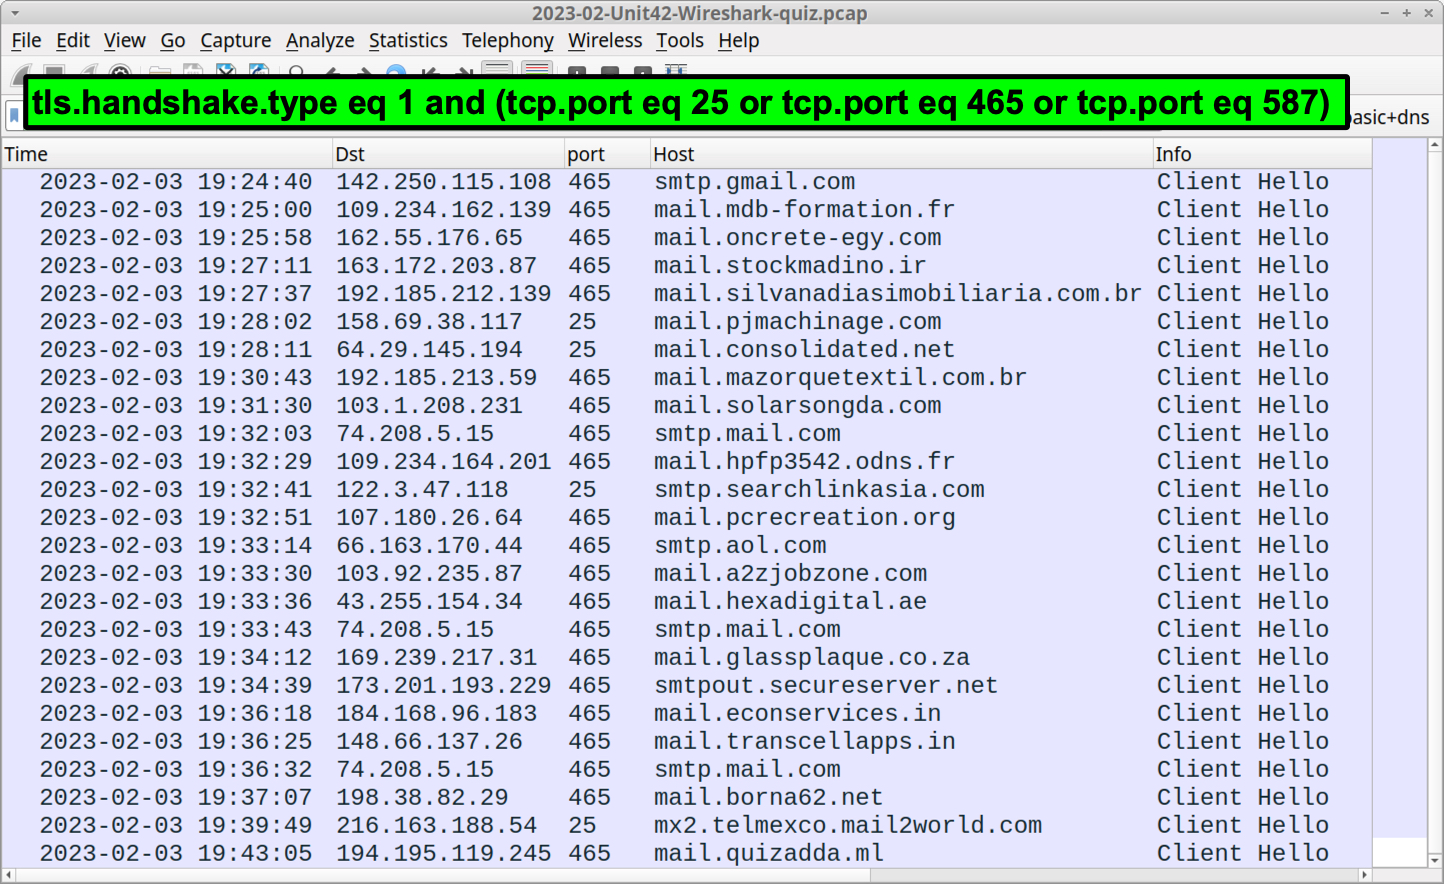 Image 15 is a screenshot of Wireshark showing the refined filtering for TLS encrypted email traffic. 